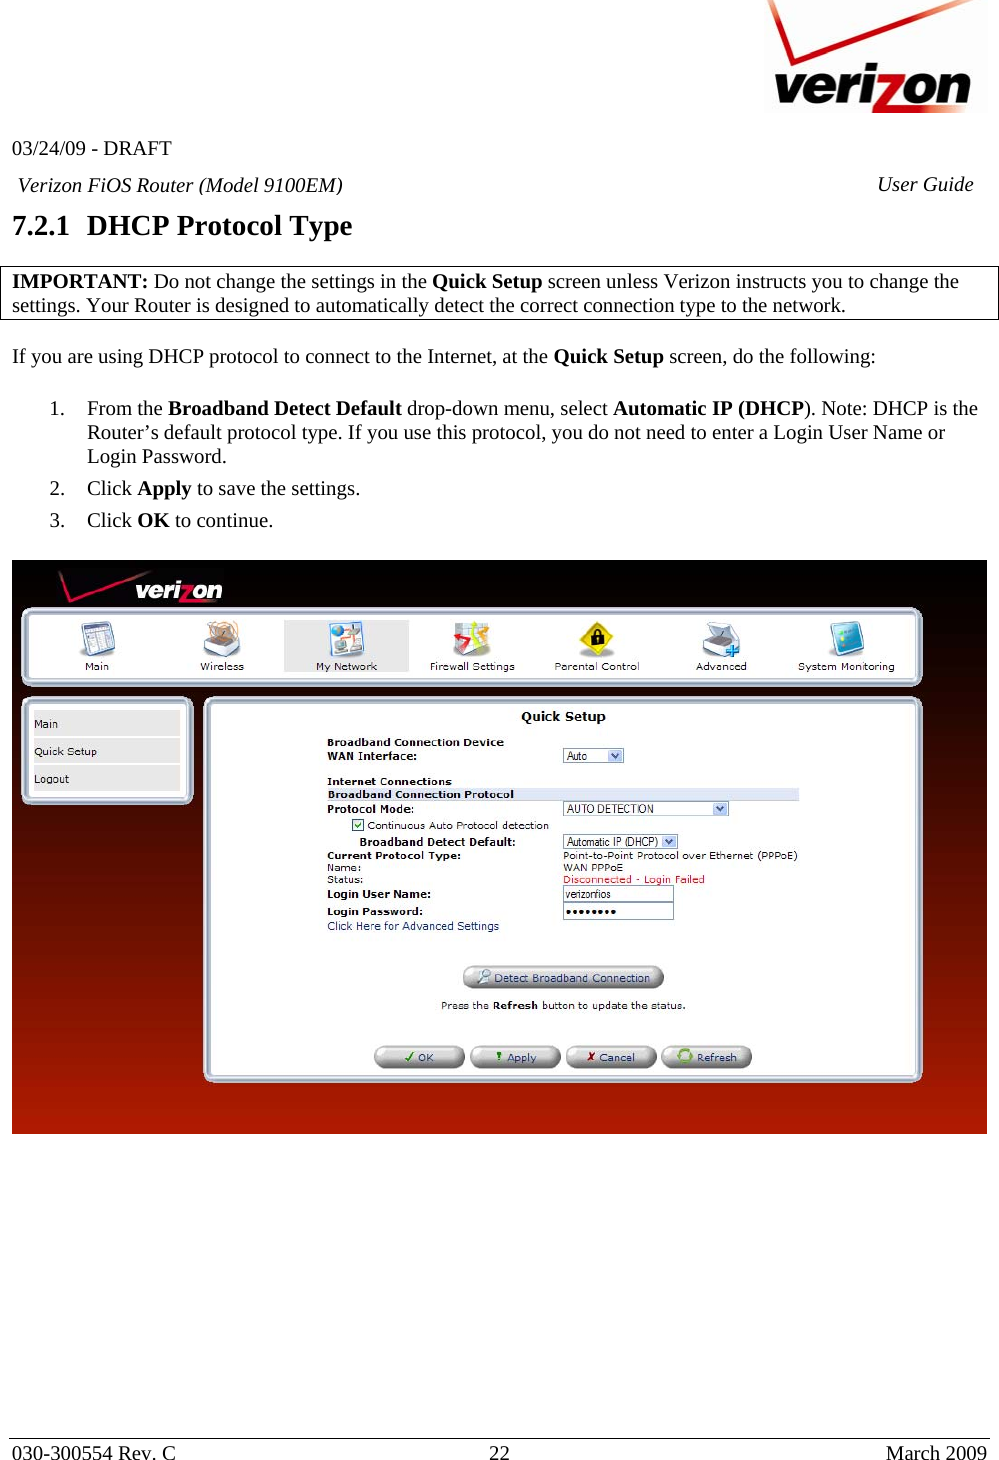   03/24/09 - DRAFT   030-300554 Rev. C  22      March 2009  Verizon FiOS Router (Model 9100EM) User Guide7.2.1 DHCP Protocol Type  IMPORTANT: Do not change the settings in the Quick Setup screen unless Verizon instructs you to change the settings. Your Router is designed to automatically detect the correct connection type to the network.    If you are using DHCP protocol to connect to the Internet, at the Quick Setup screen, do the following:  1. From the Broadband Detect Default drop-down menu, select Automatic IP (DHCP). Note: DHCP is the Router’s default protocol type. If you use this protocol, you do not need to enter a Login User Name or Login Password.  2. Click Apply to save the settings. 3. Click OK to continue.               